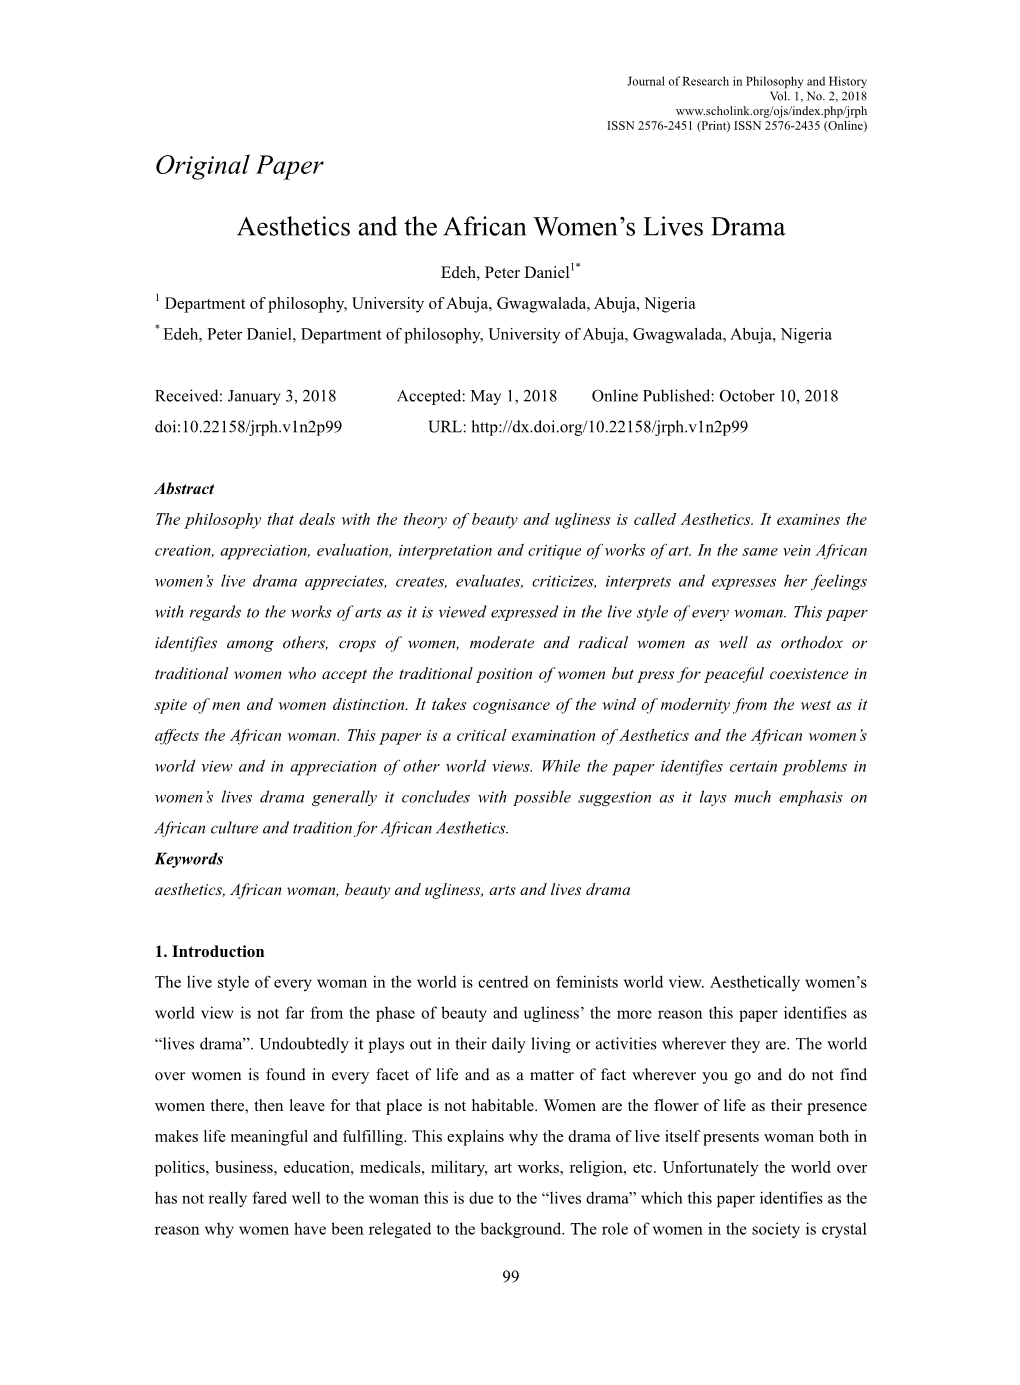 Original Paper Aesthetics and the African Women's Lives Drama